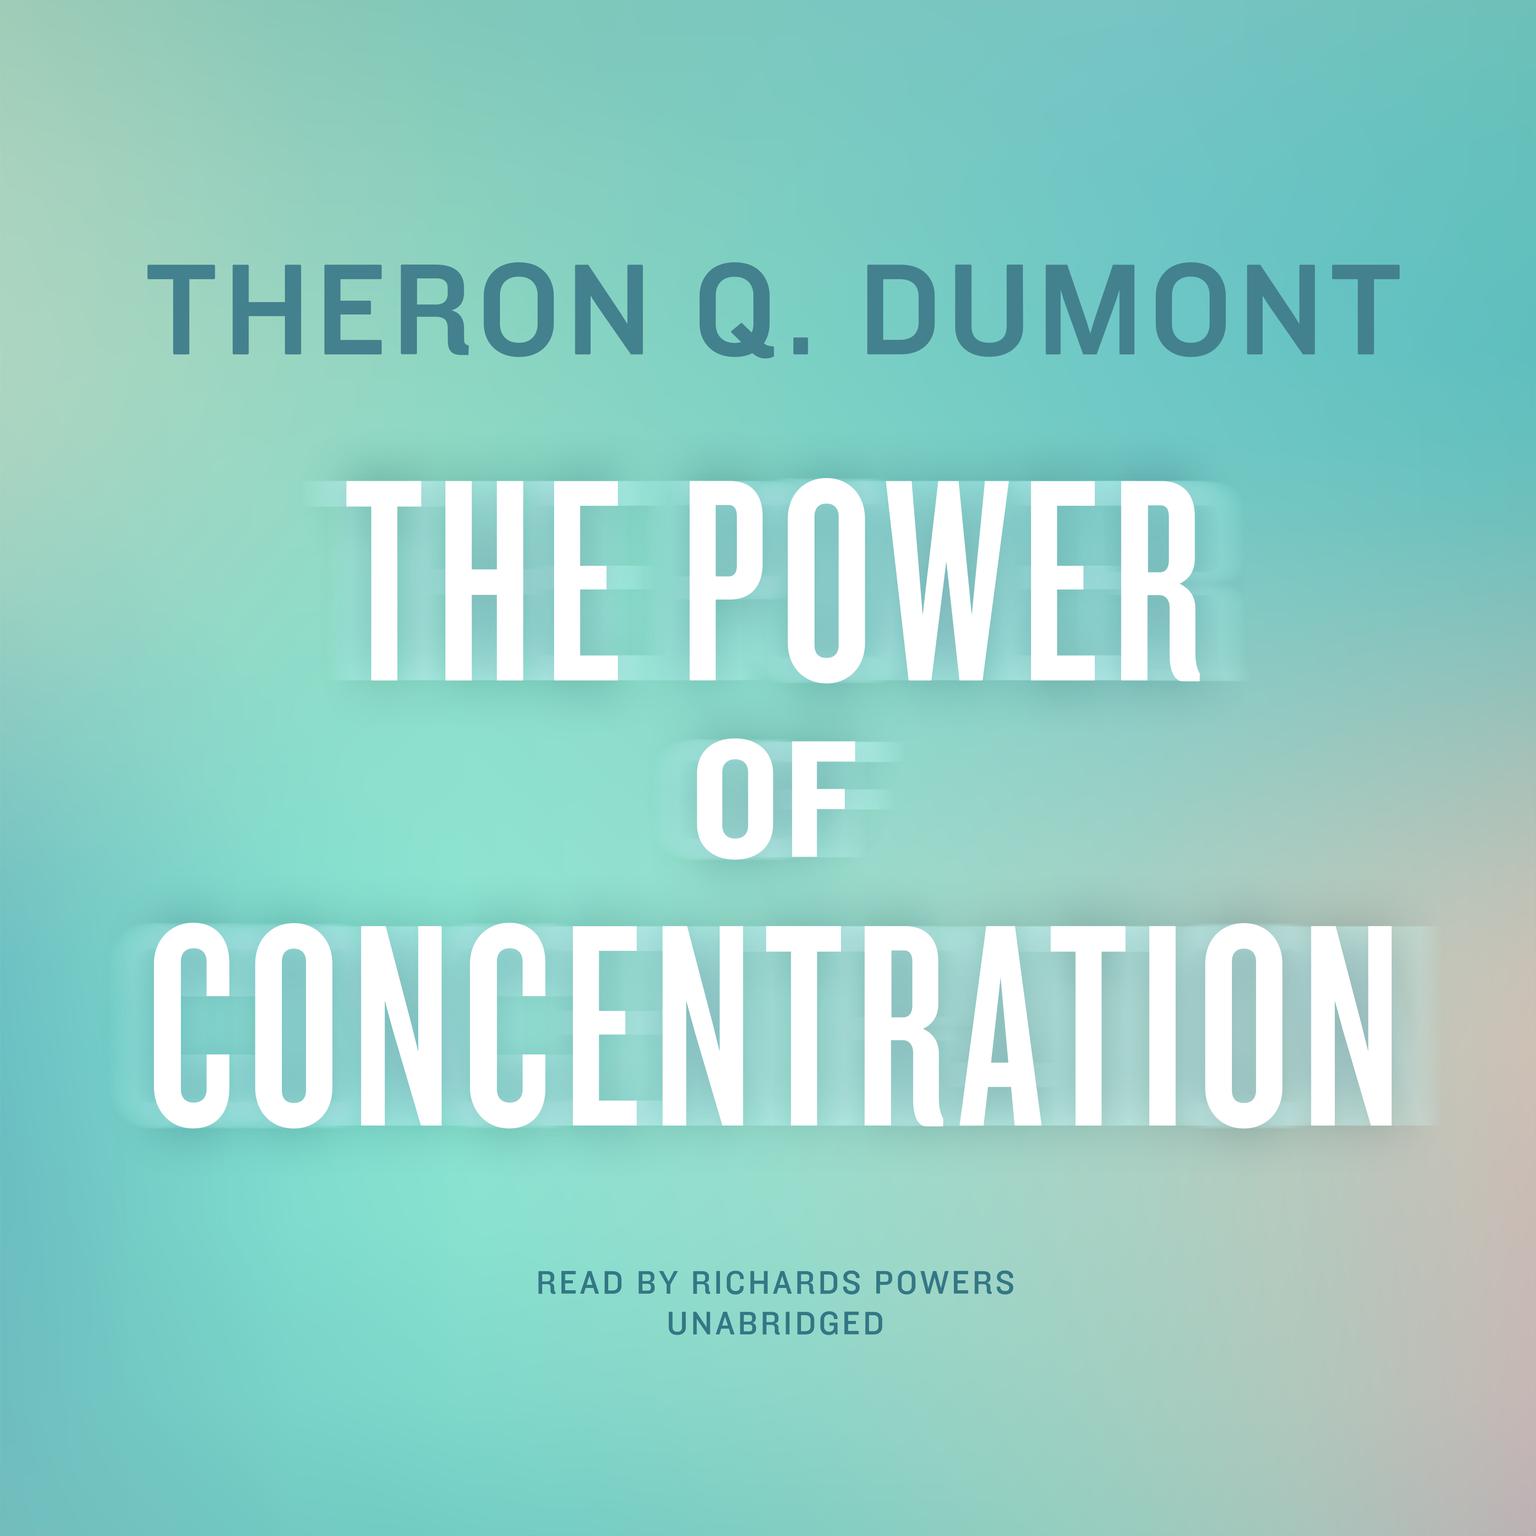 The Power of Concentration Audiobook, by Theron Q. Dumont